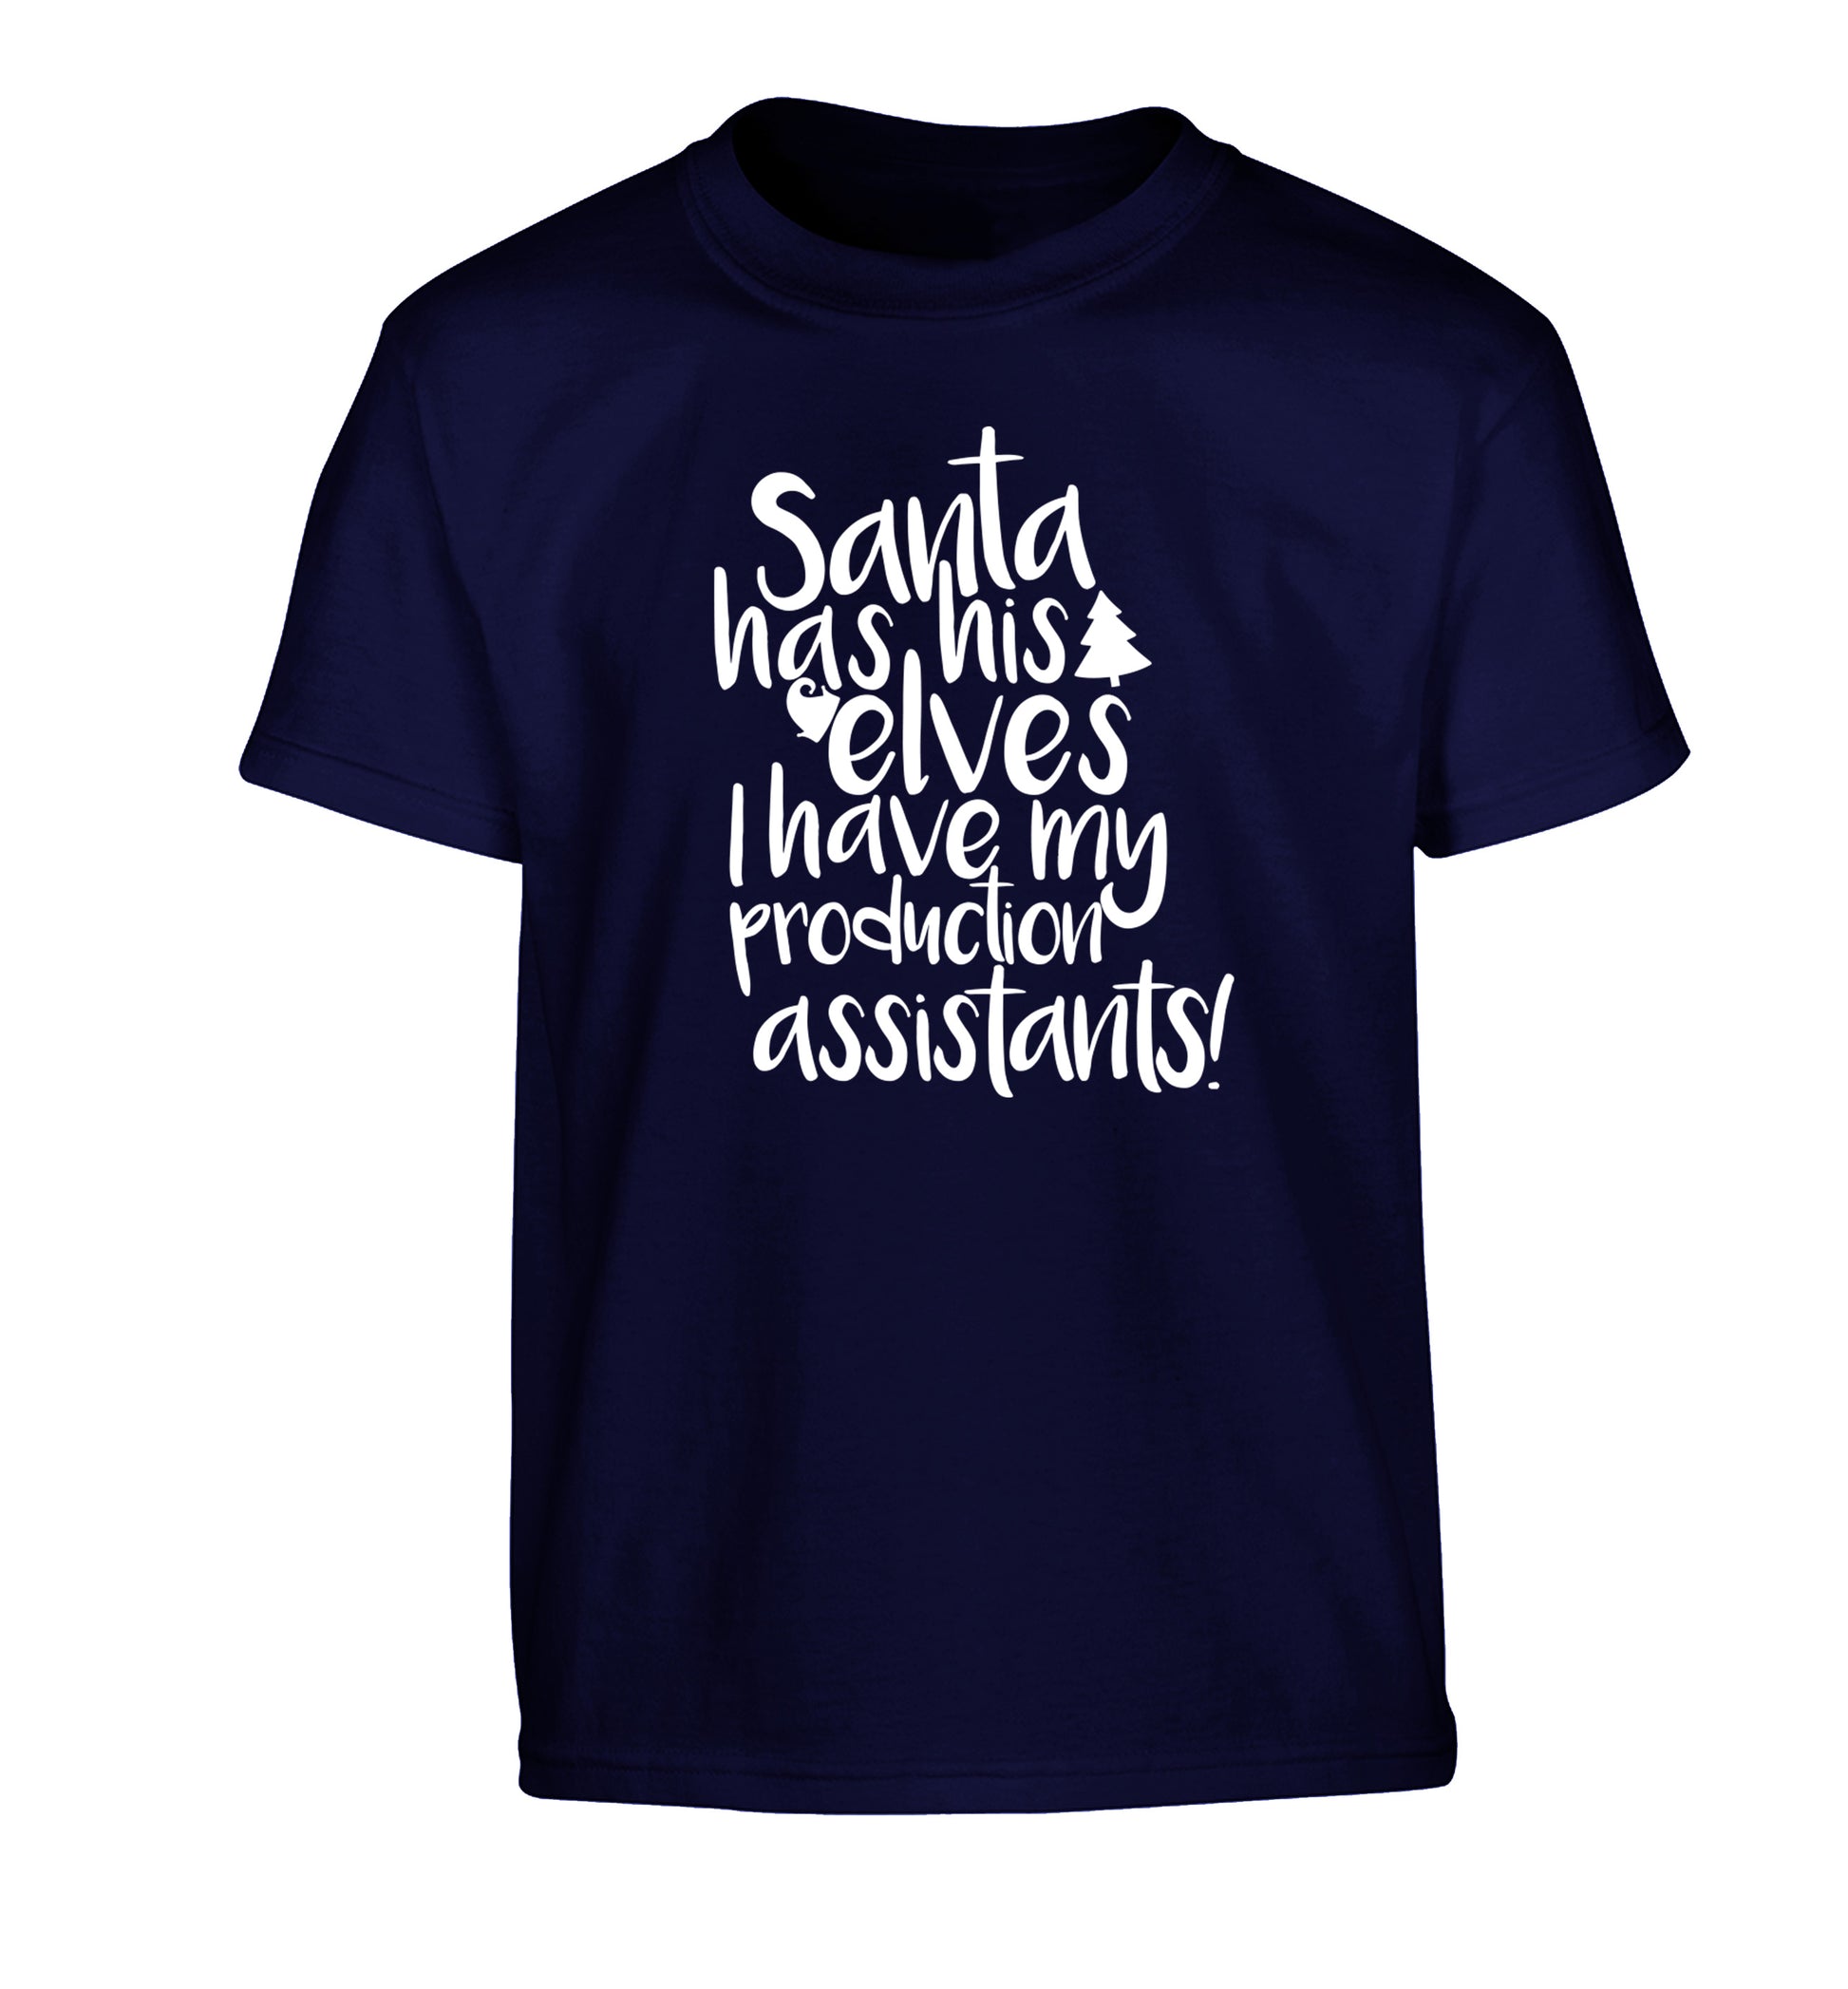 Santa has his elves I have my production assistants Children's navy Tshirt 12-14 Years